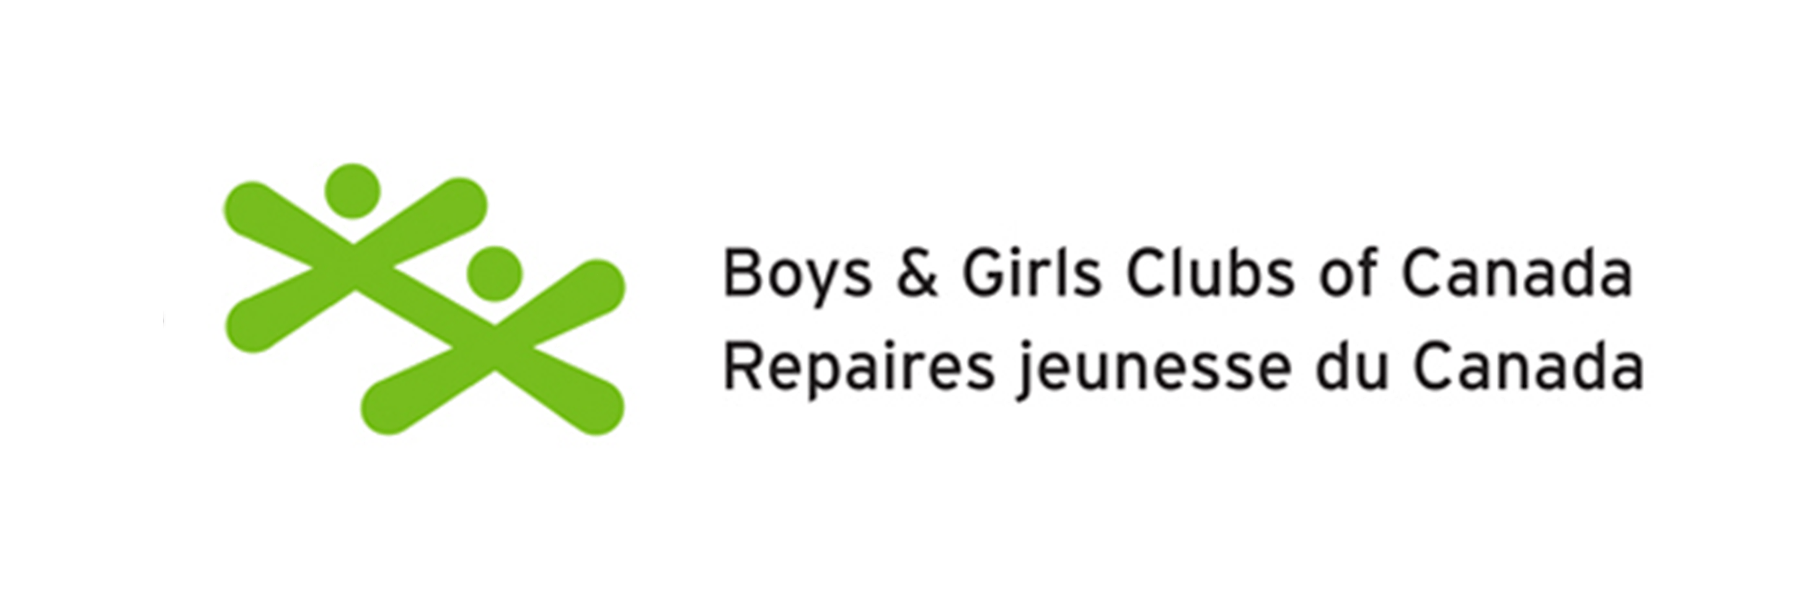 Boys and Girls Clubs of Canada green logo